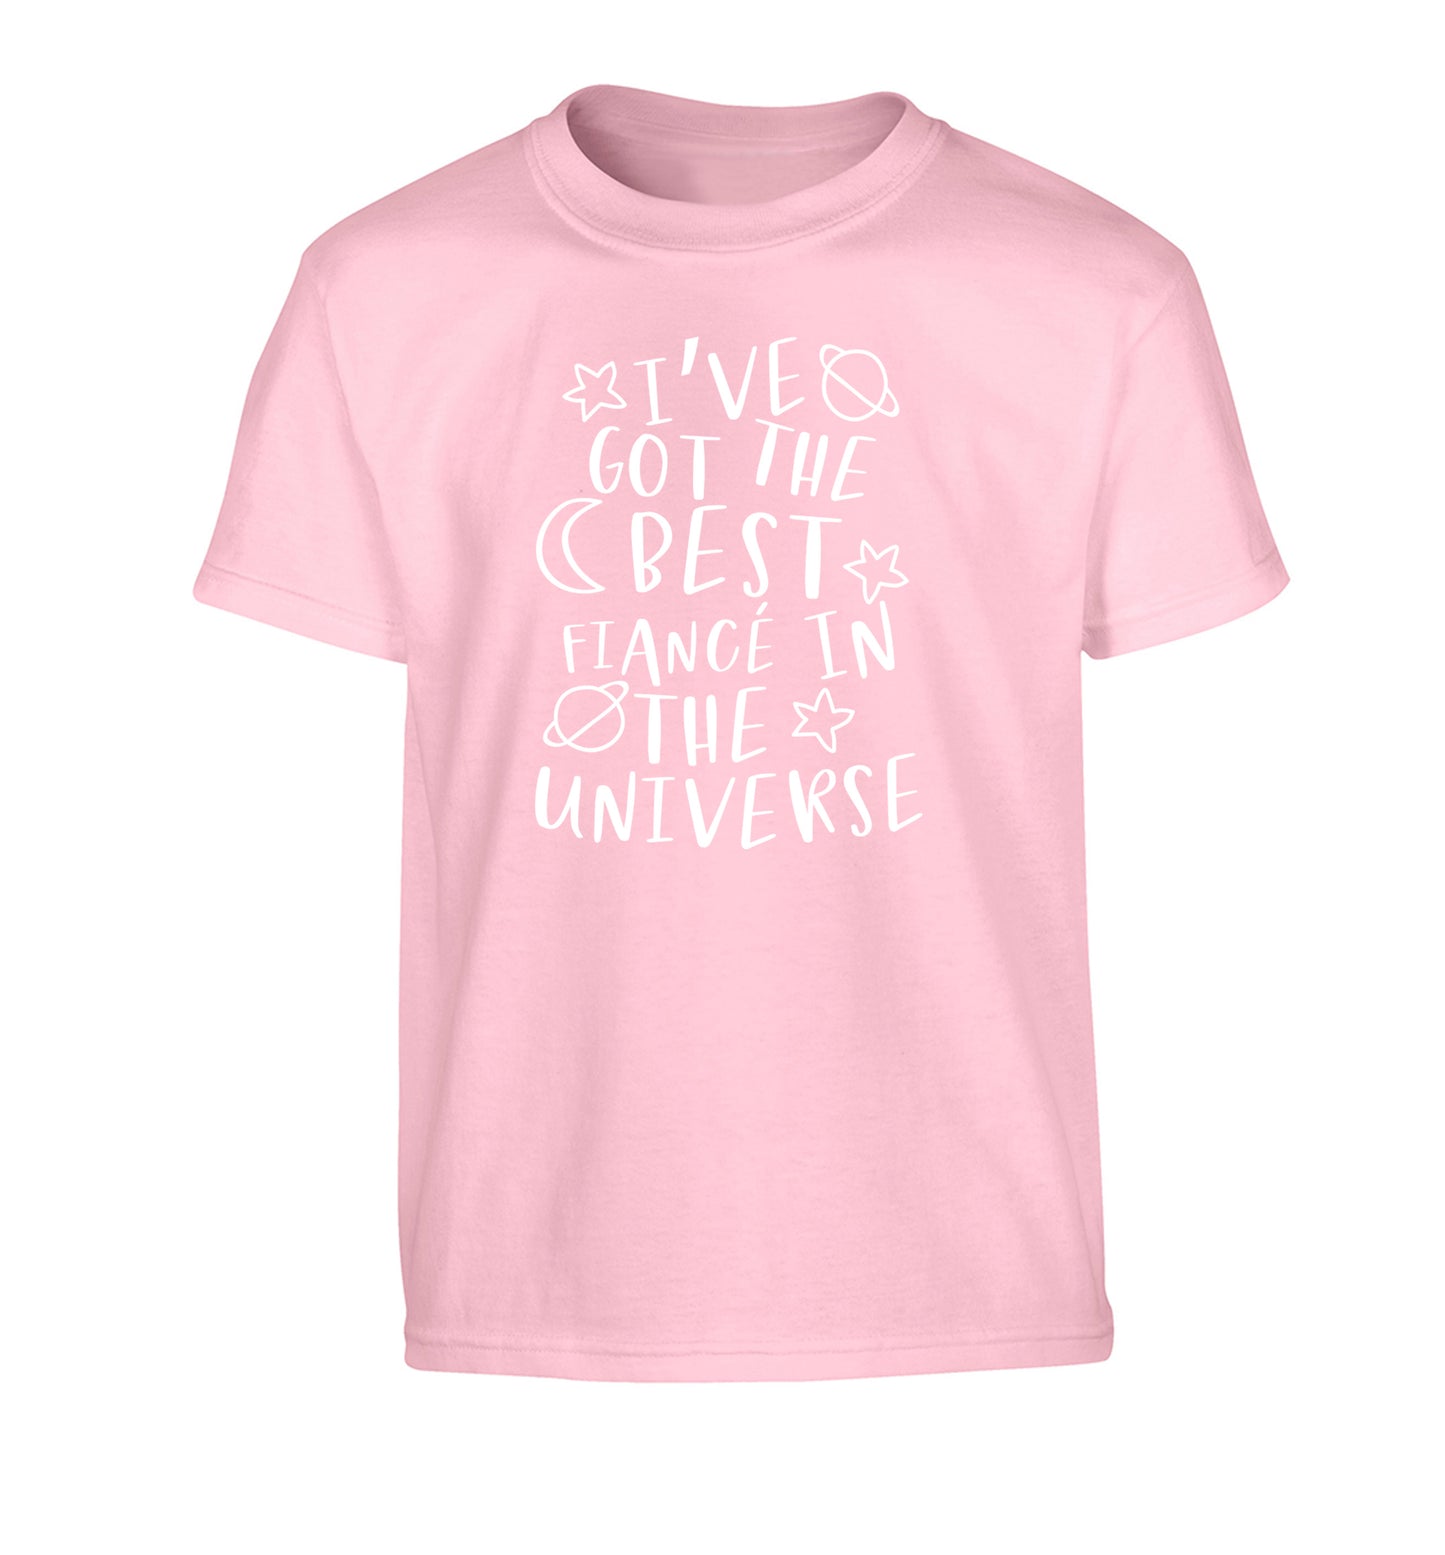 I've got the best fiance in the universe Children's light pink Tshirt 12-13 Years